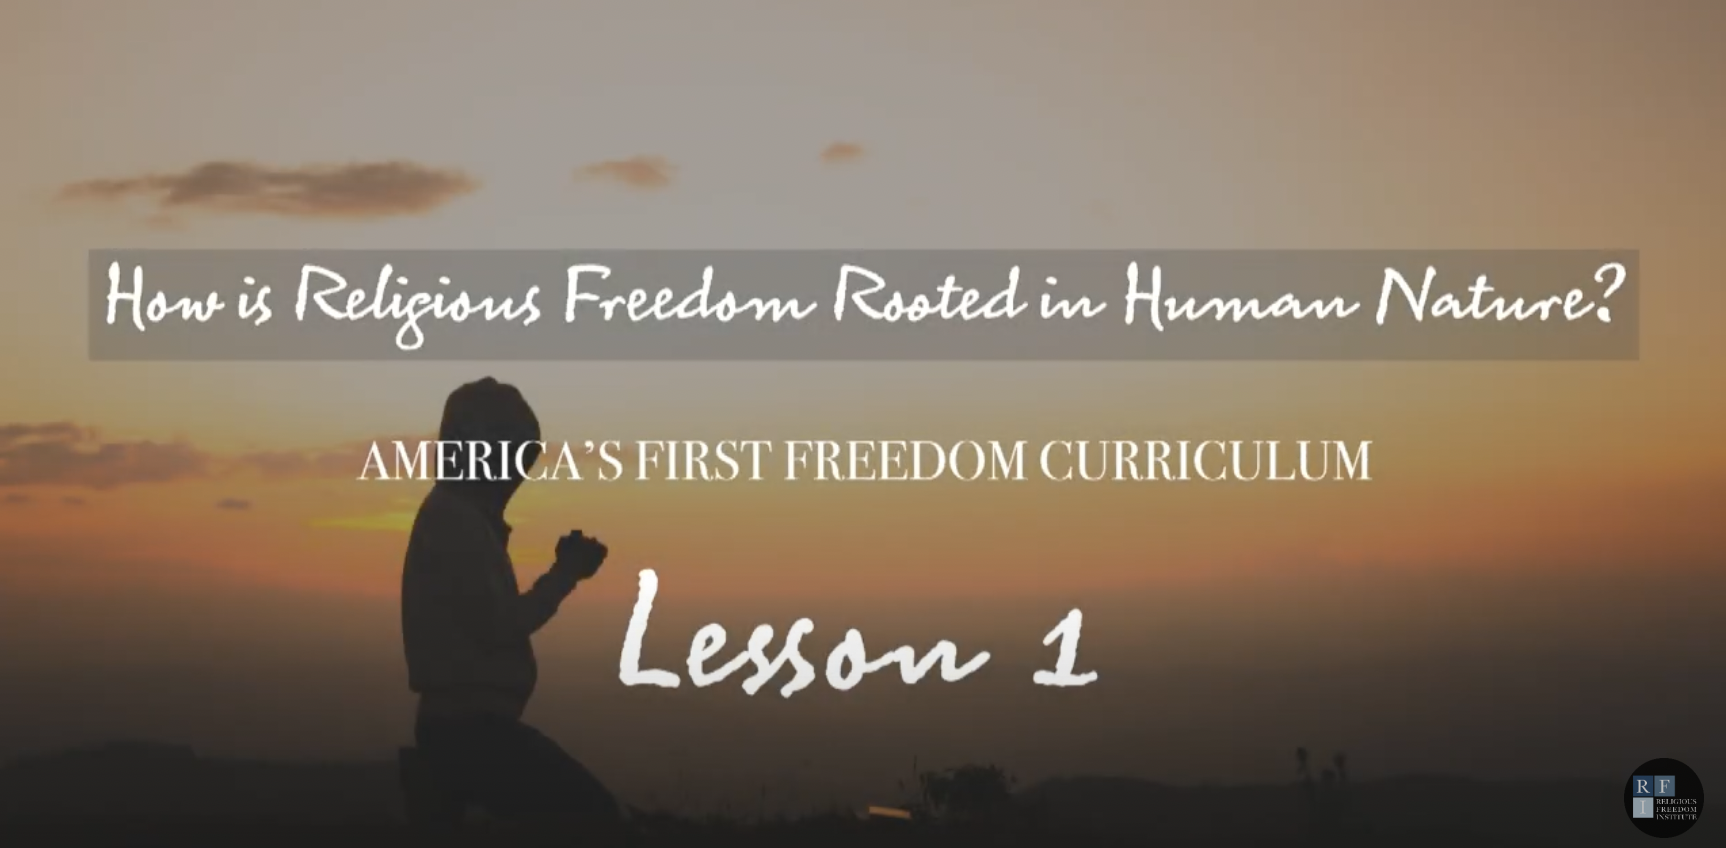 Featured image for “America’s First Freedom Curriculum Series | Video 6”